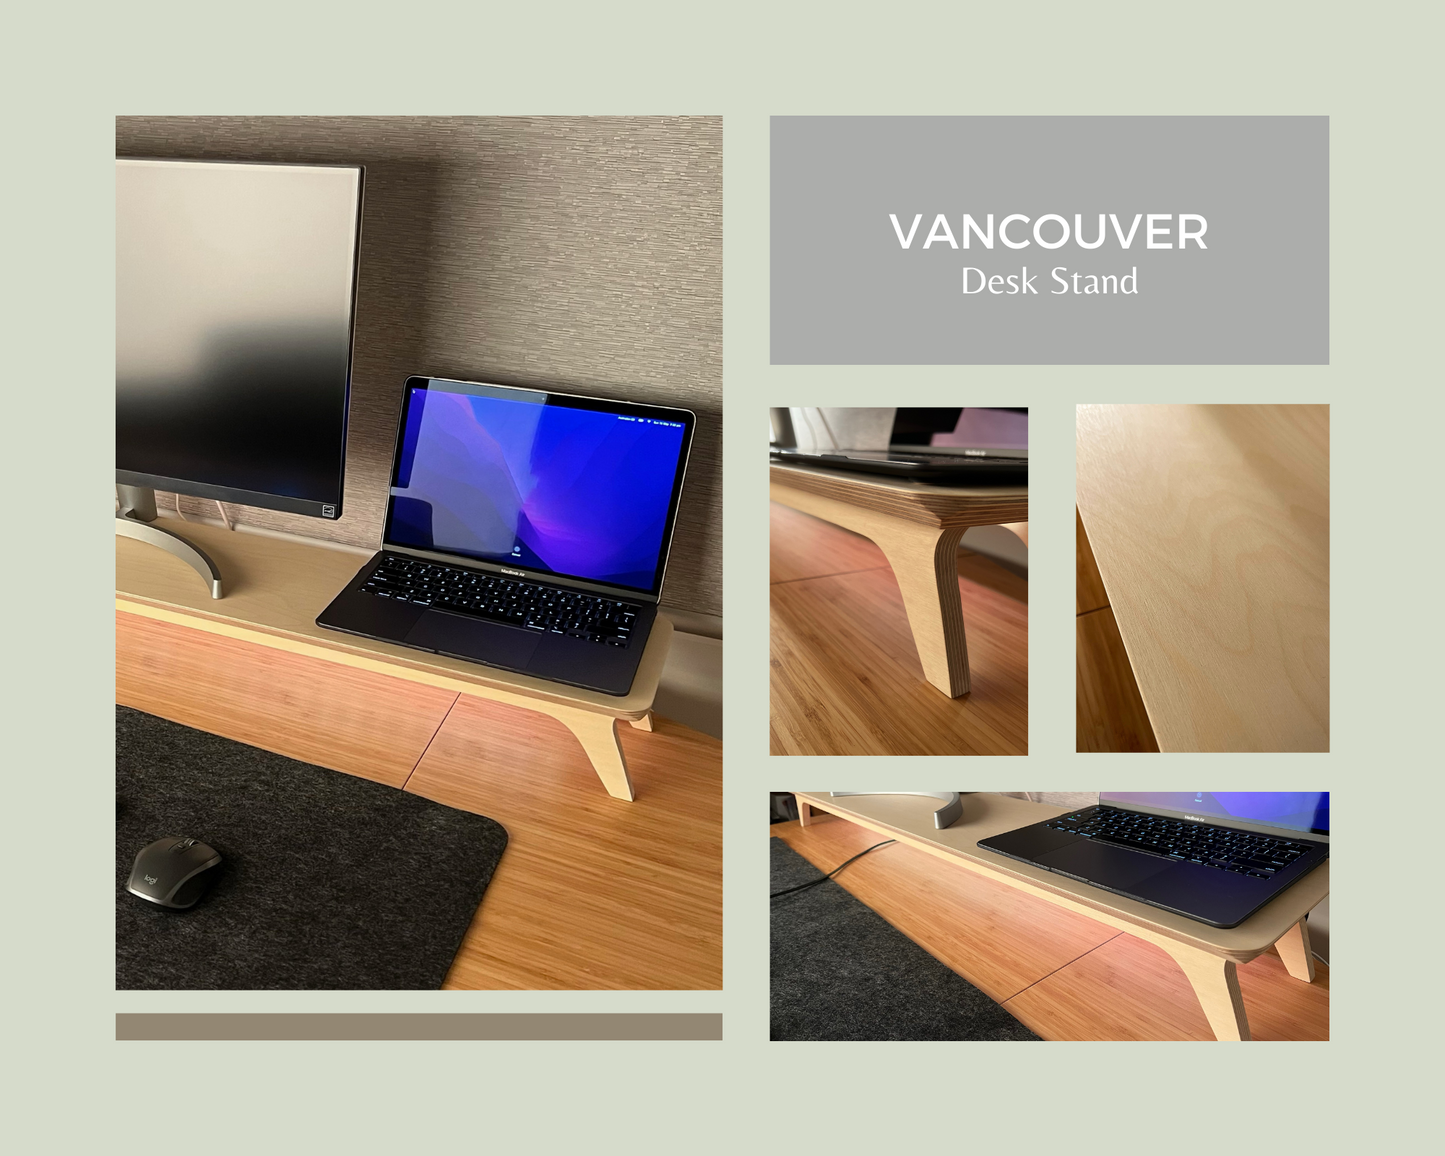 The Vancouver Desk Stand